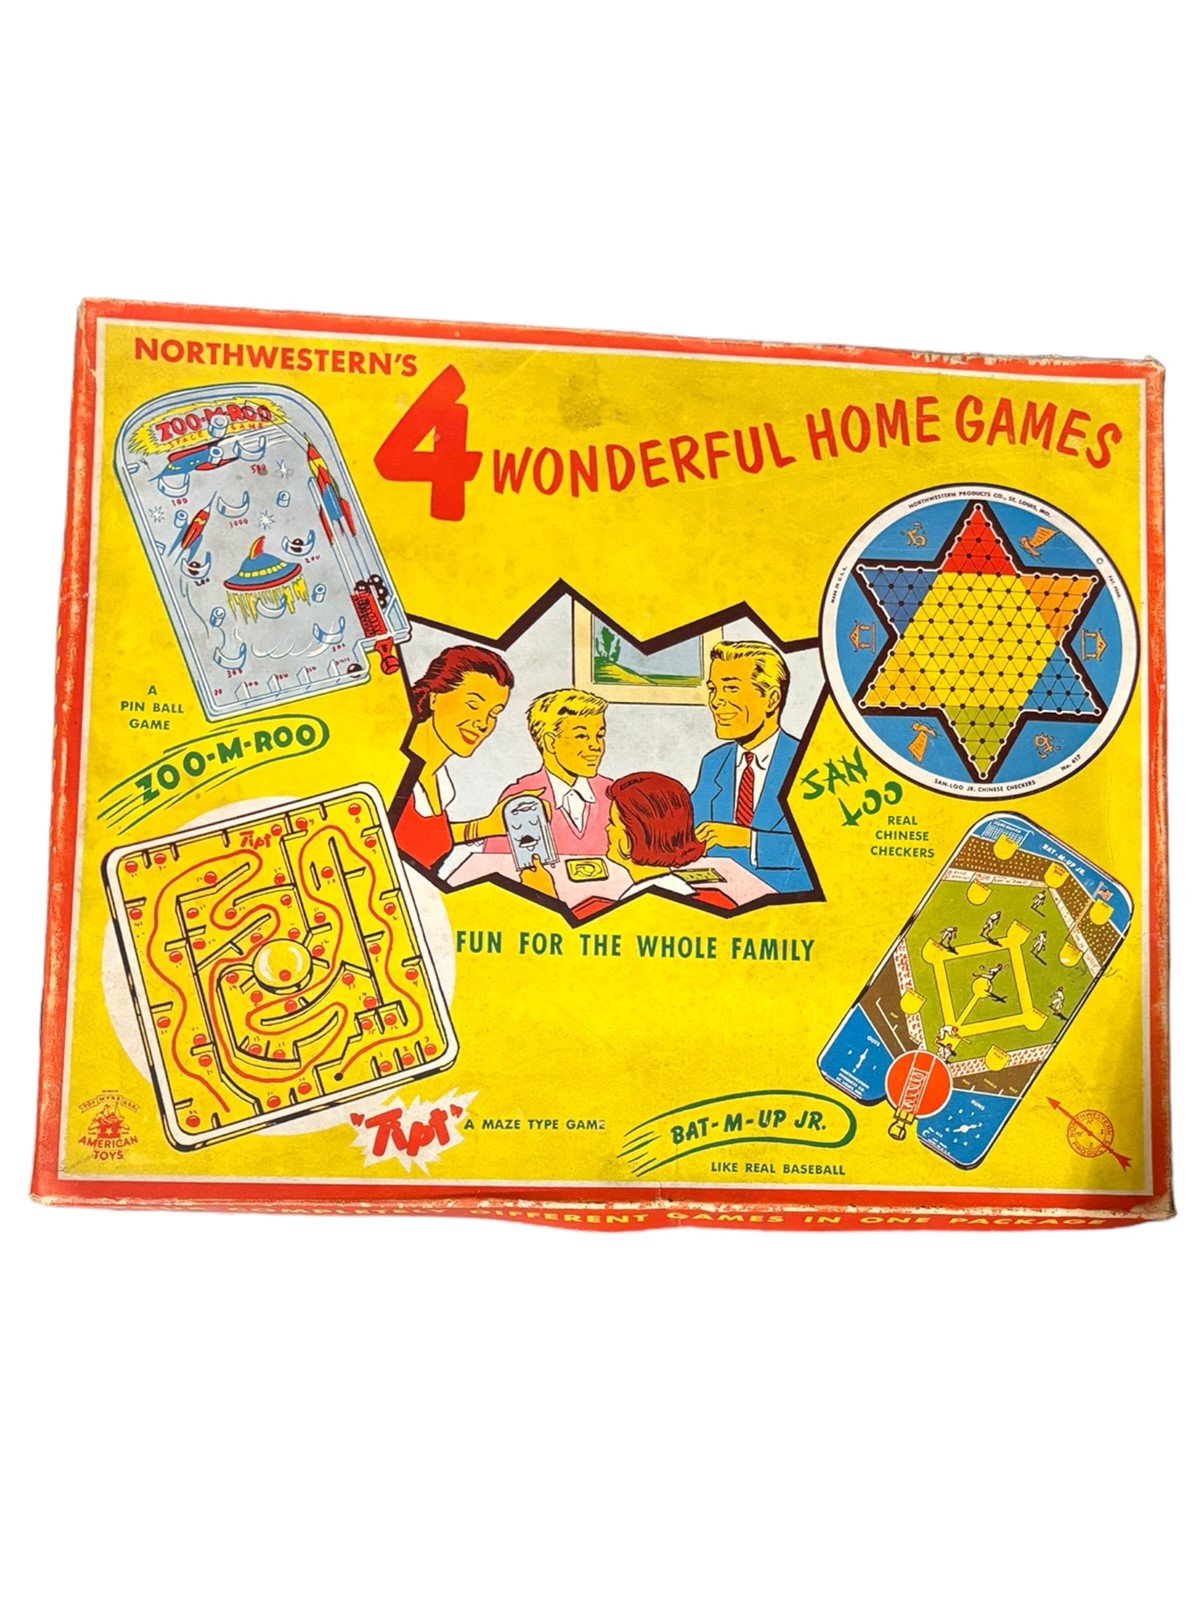 Four Wonderful Home Games Chinese Checkers Zoo-M-Roo Bat-M-Up Jr. Tiptm